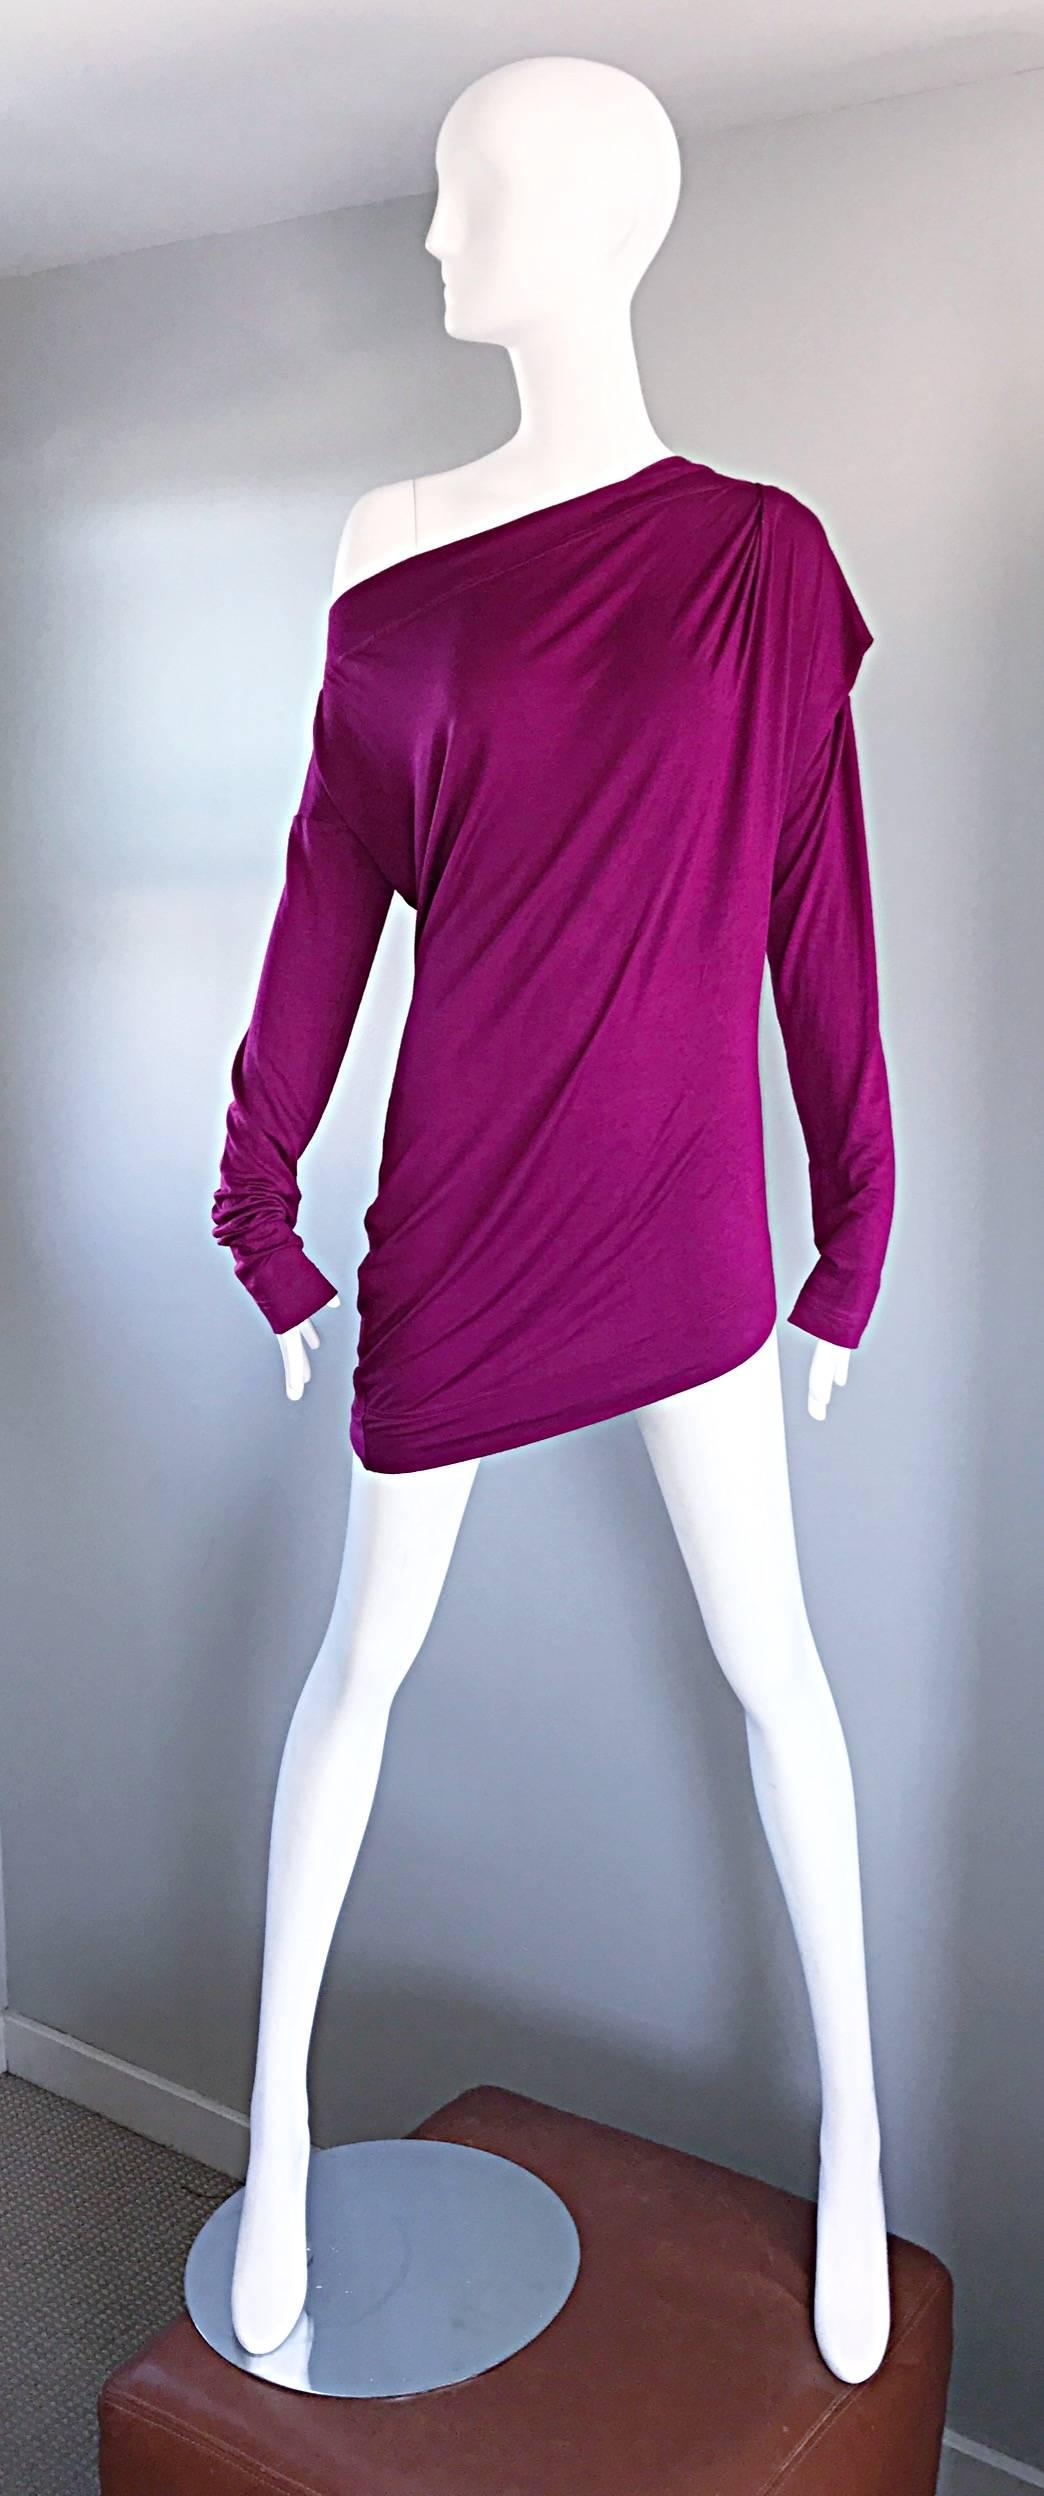 Sexy vintage VIVIENNE WESTWOOD magenta pink Grecian styles off-the-shoulder tunic top, or mini dress! Features intricate draping details throughout. Can be worn multiple ways (see photos). Can also be worn as a daring mini dress, or with leggings,